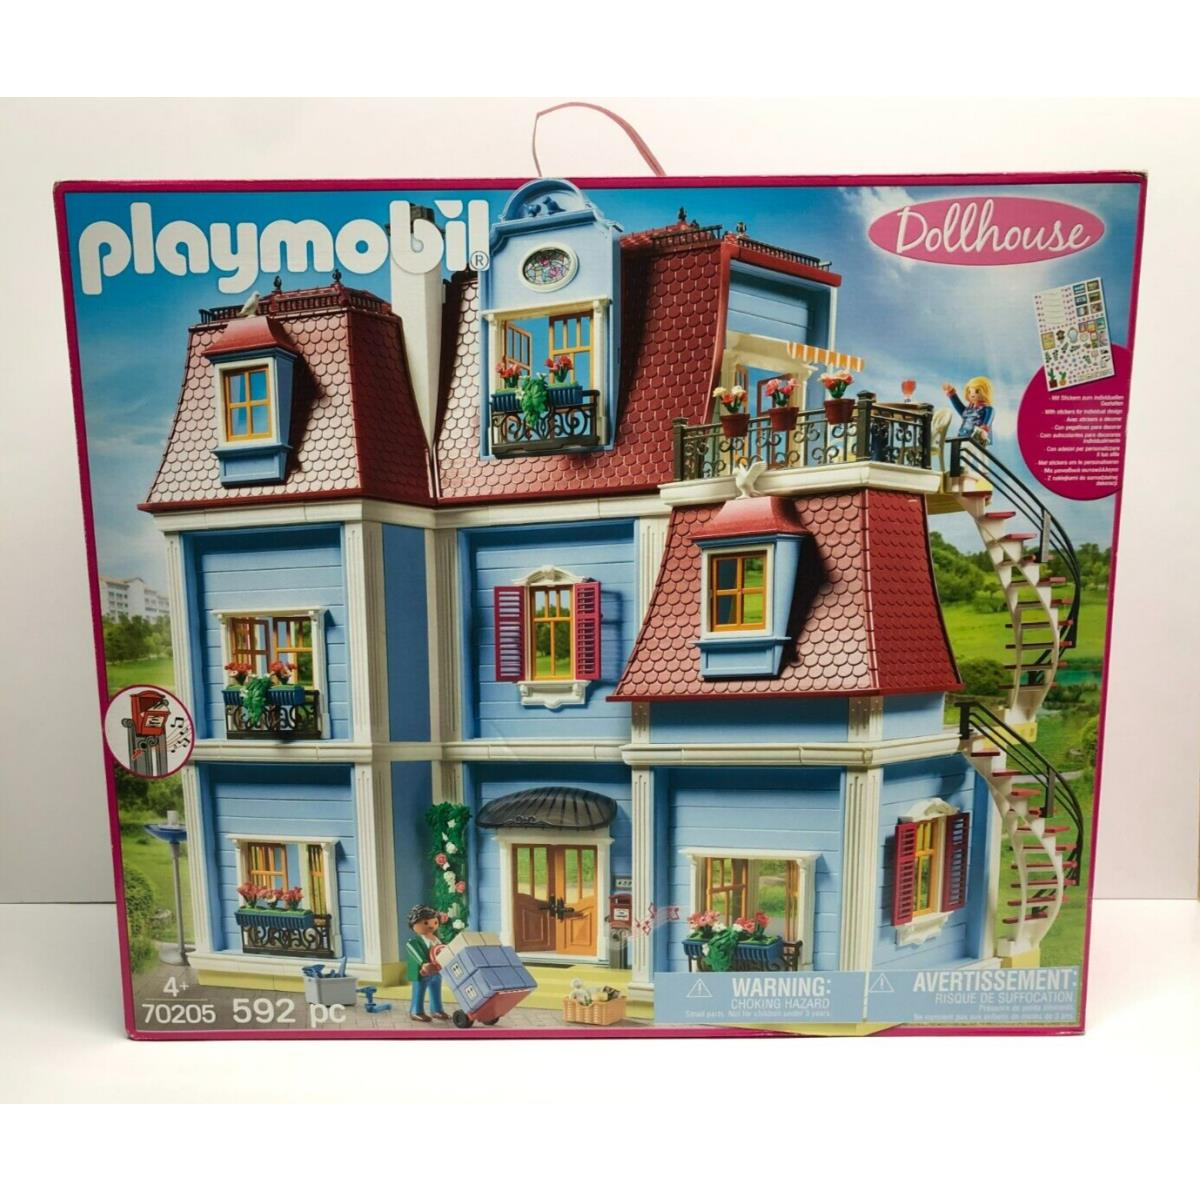 Playmobil 70205 Large Dollhouse with Doorbell 592 pc